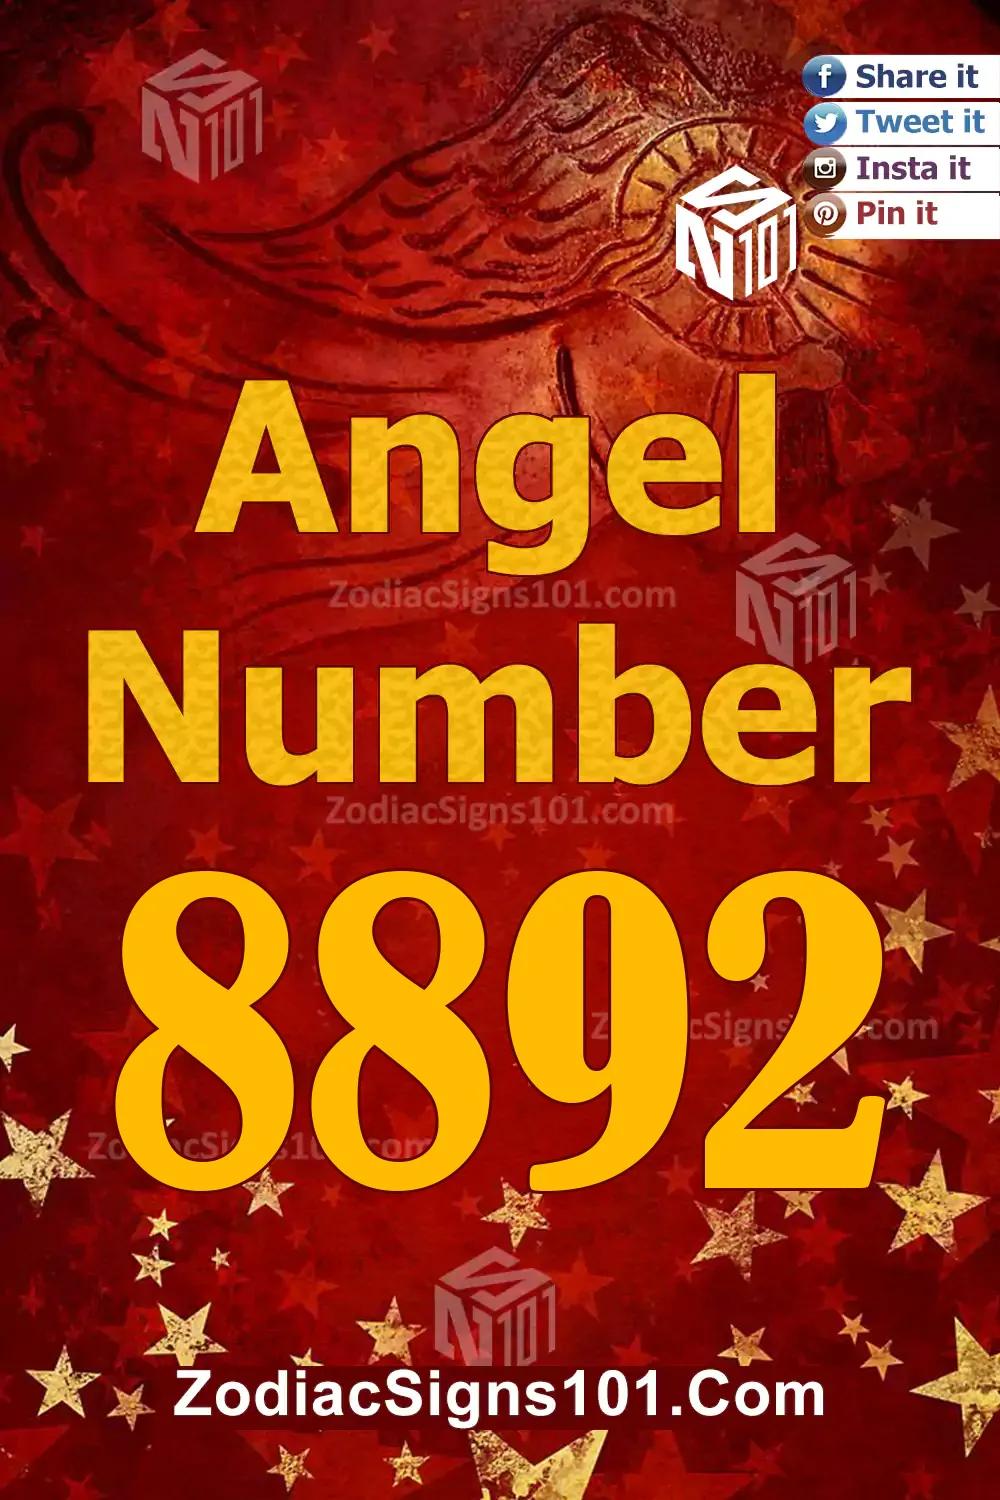 8892 Angel Number Meaning